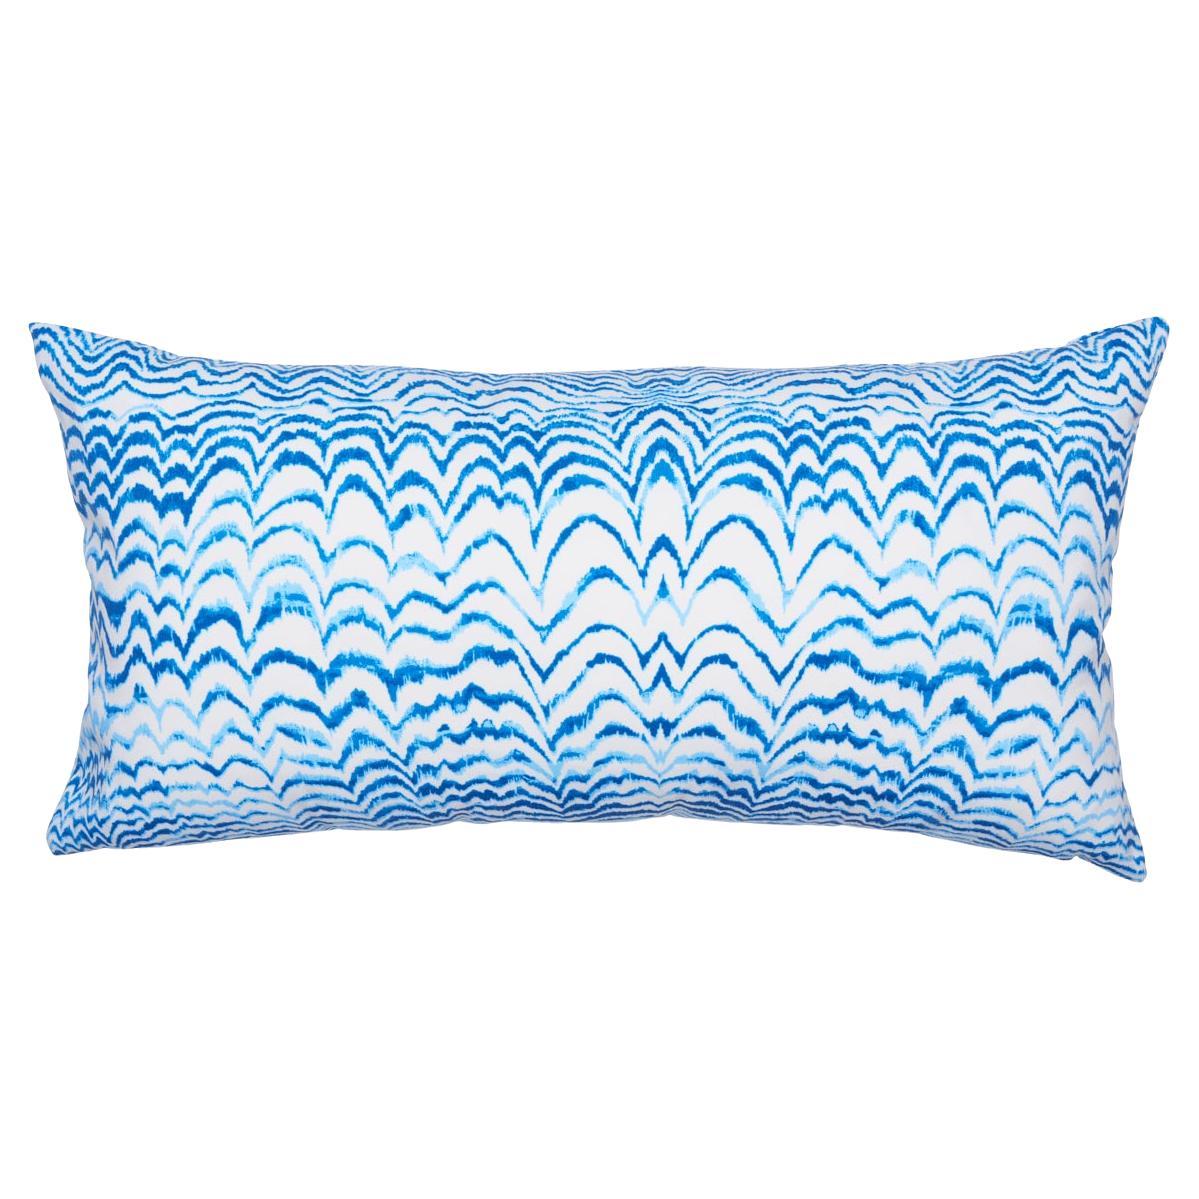 Ink Wave Print I/O Pillow 24x12 " For Sale